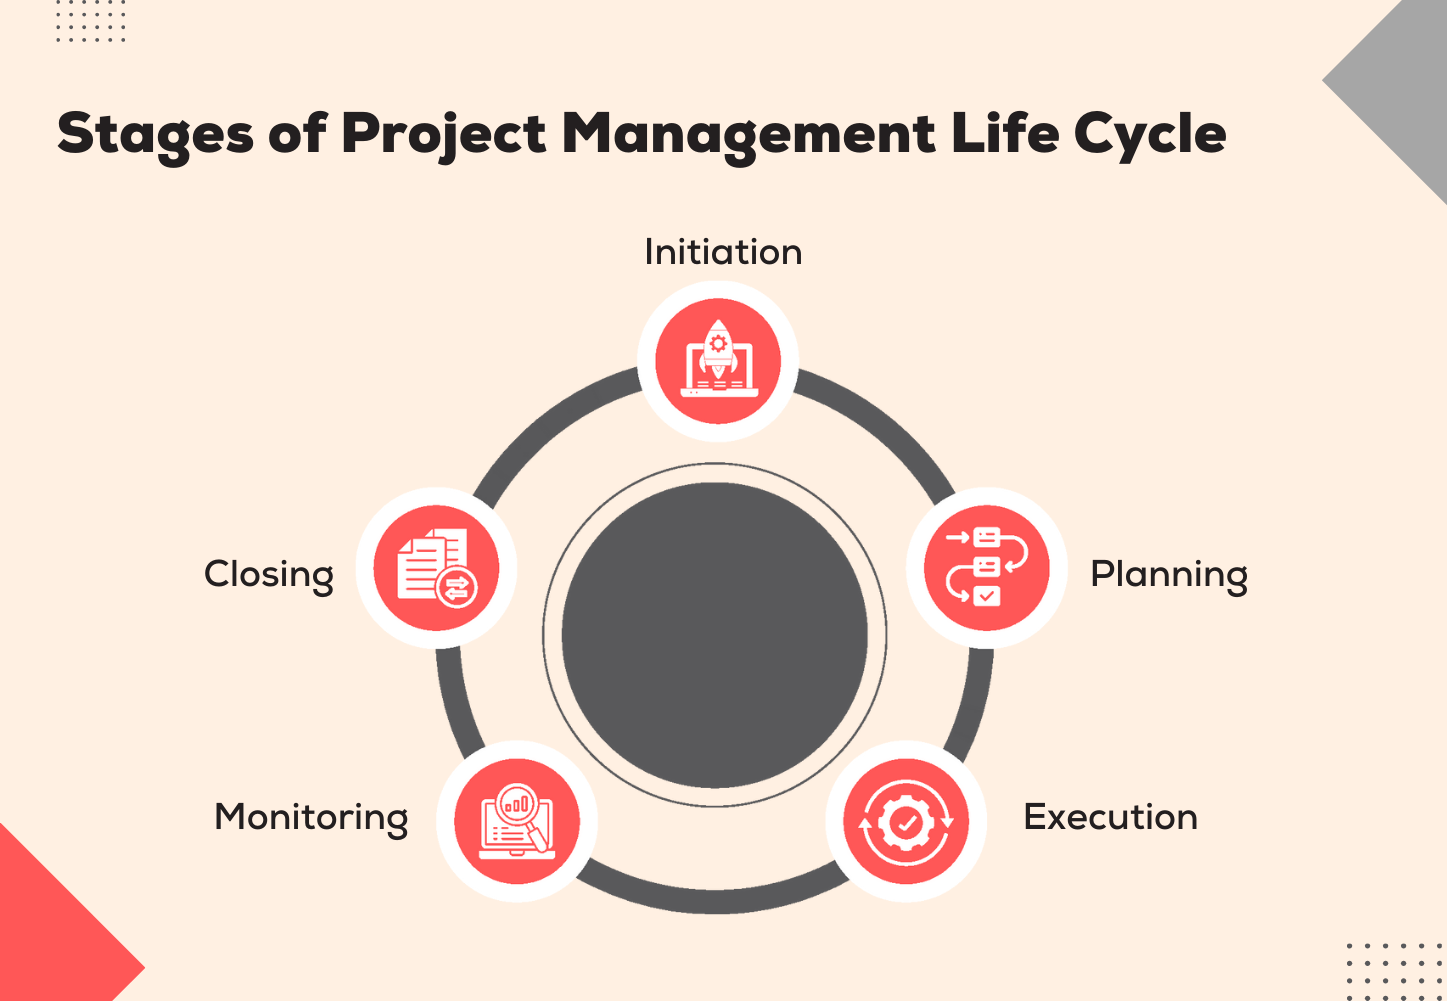 Stages of Project Management Life Cycle